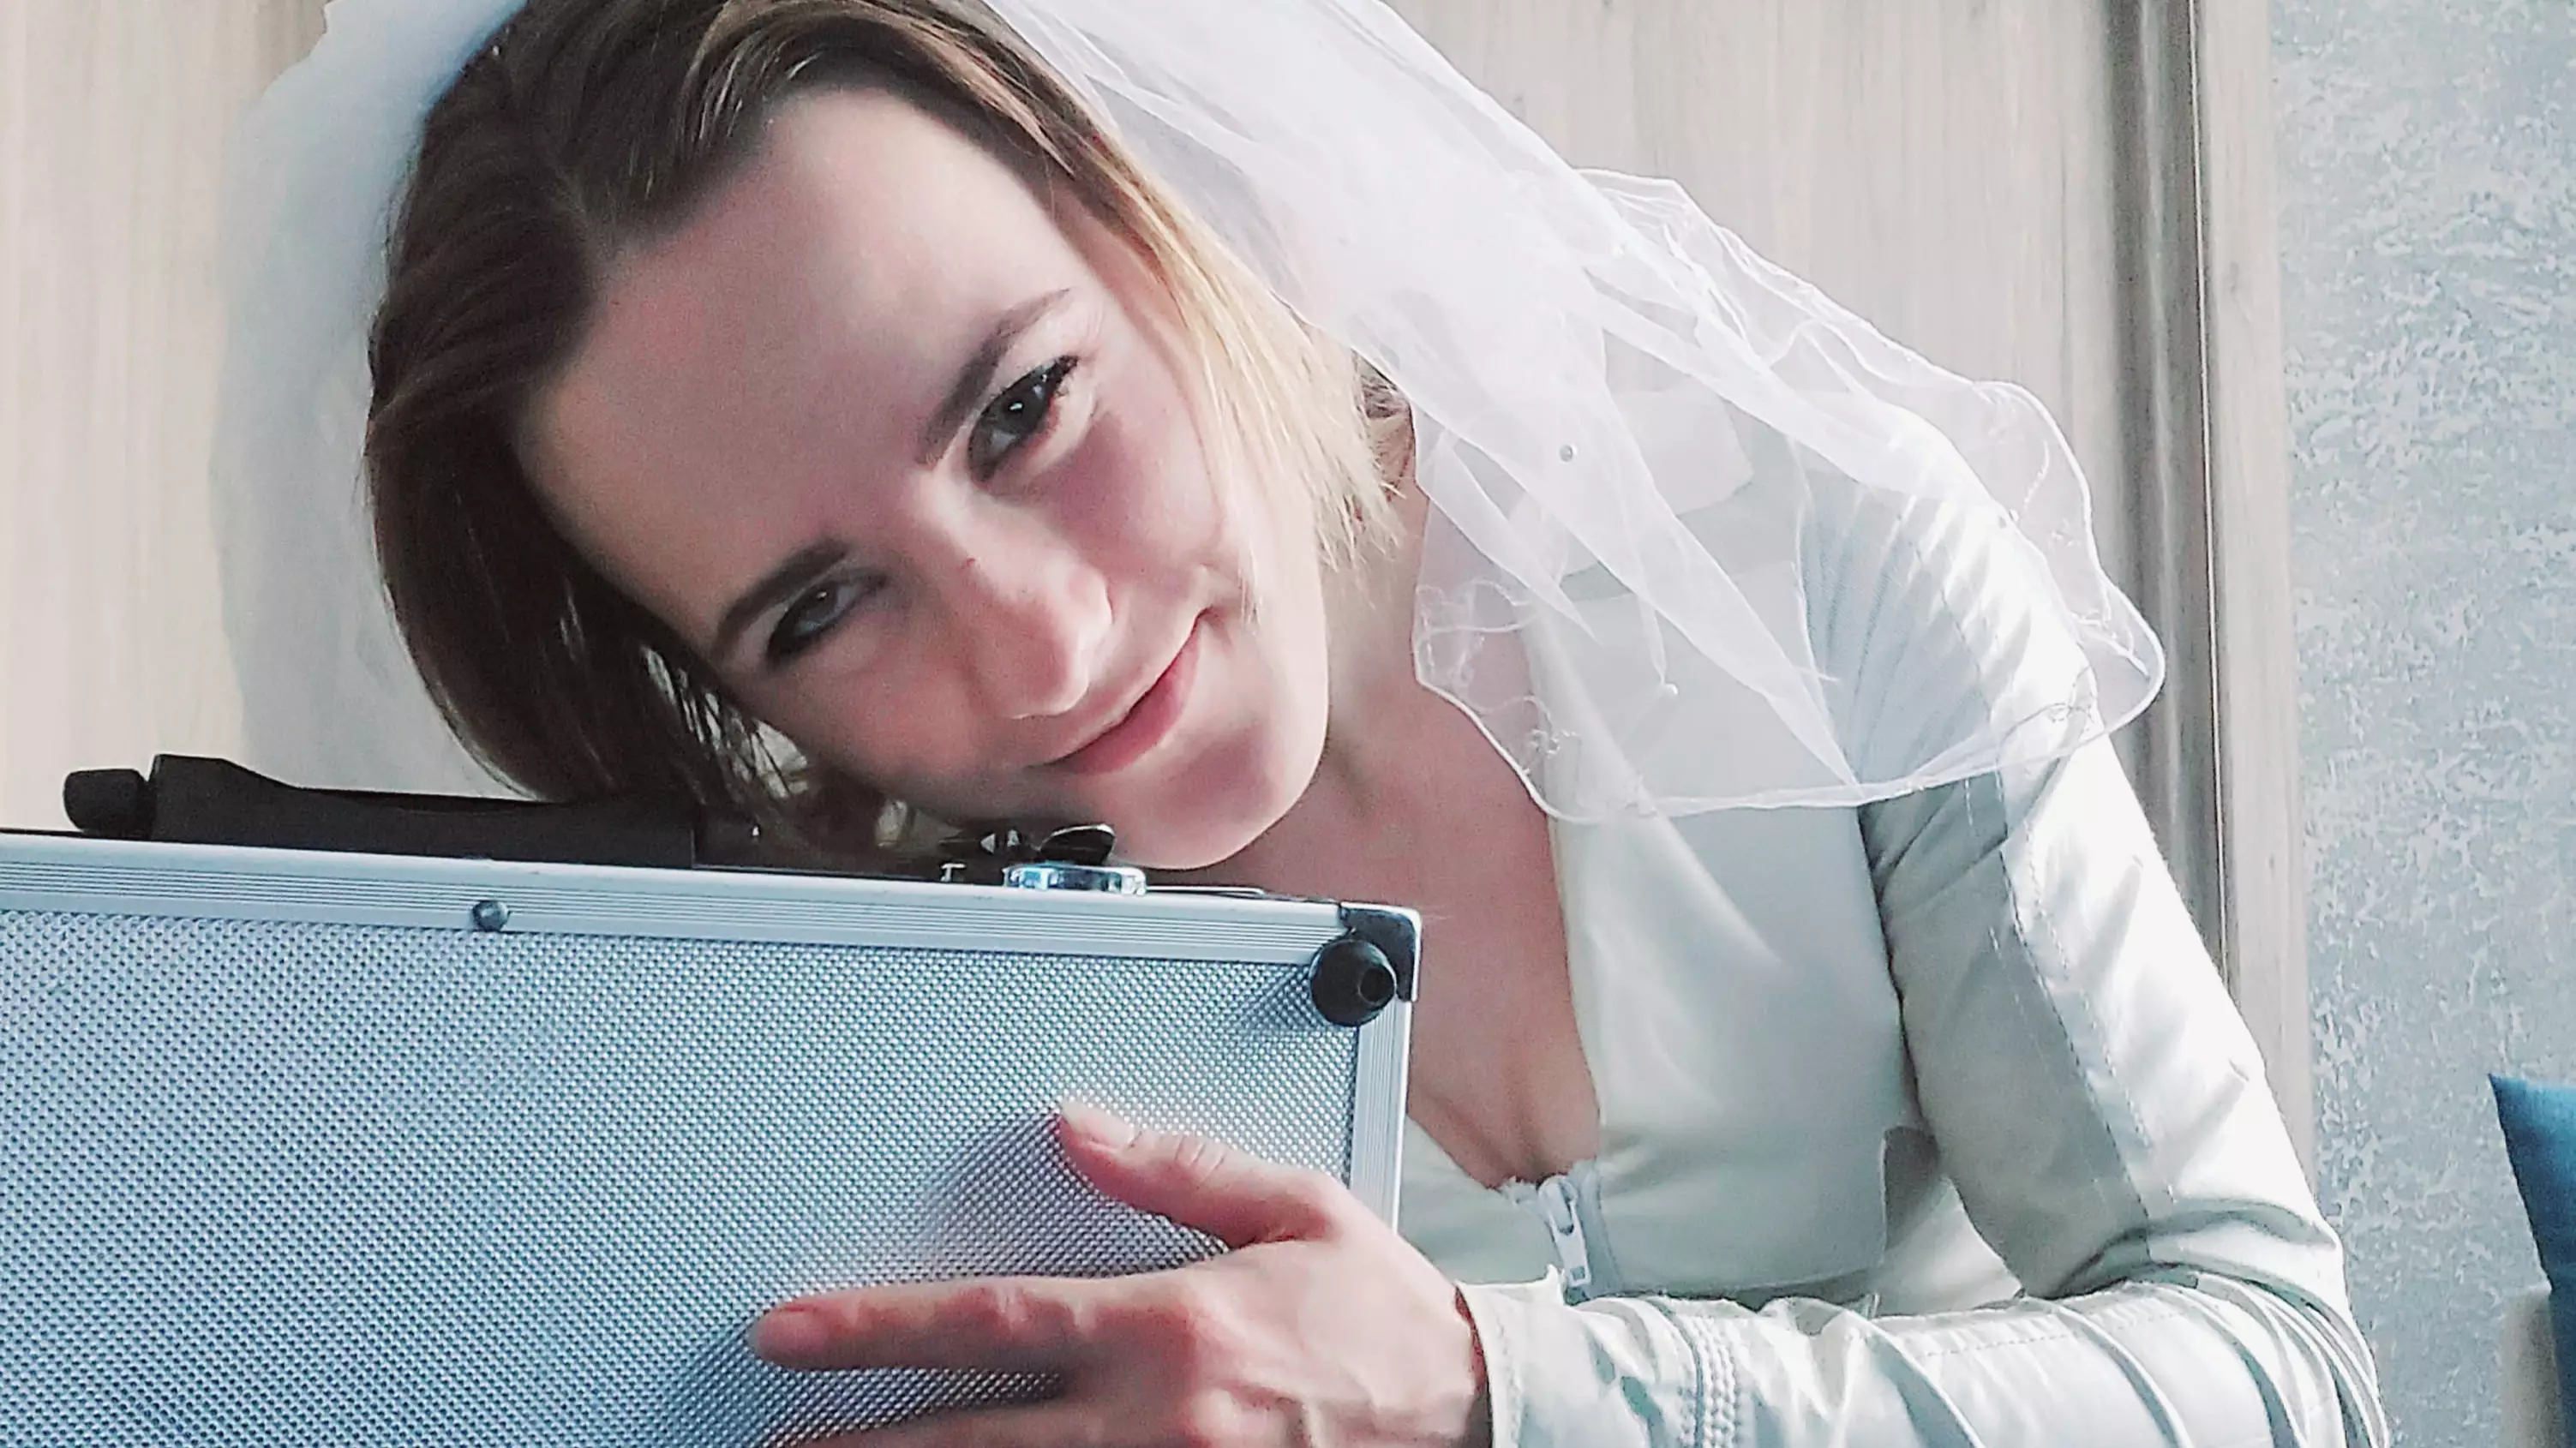 Woman Marries Briefcase After Five Years Together